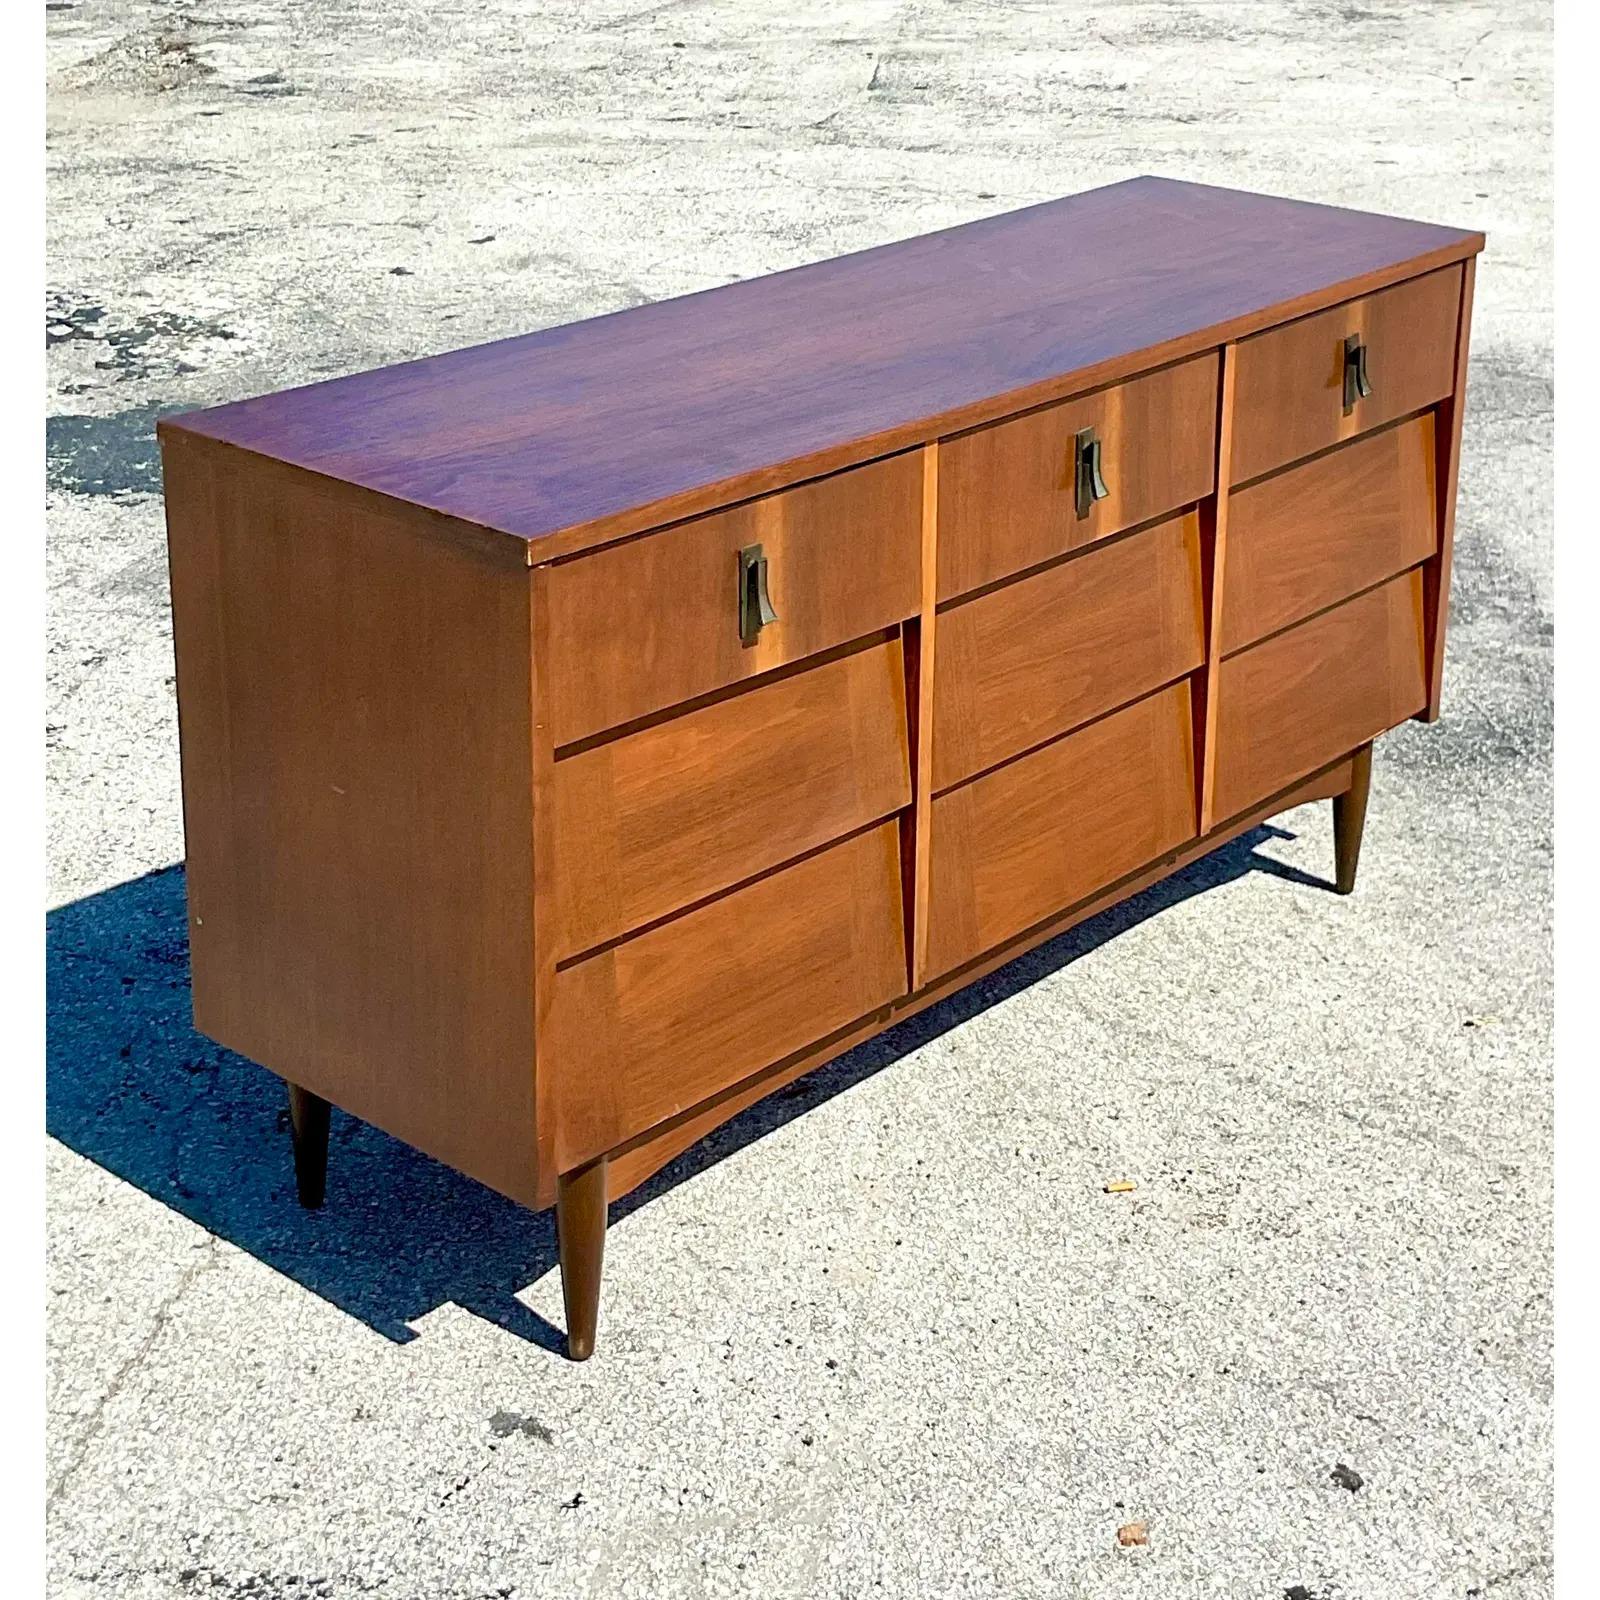 A fantastic vintage MCM 9 drawer dresser. Beautiful two tone wood with a chic Louvered design. Acquired from a Palm Beach estate.